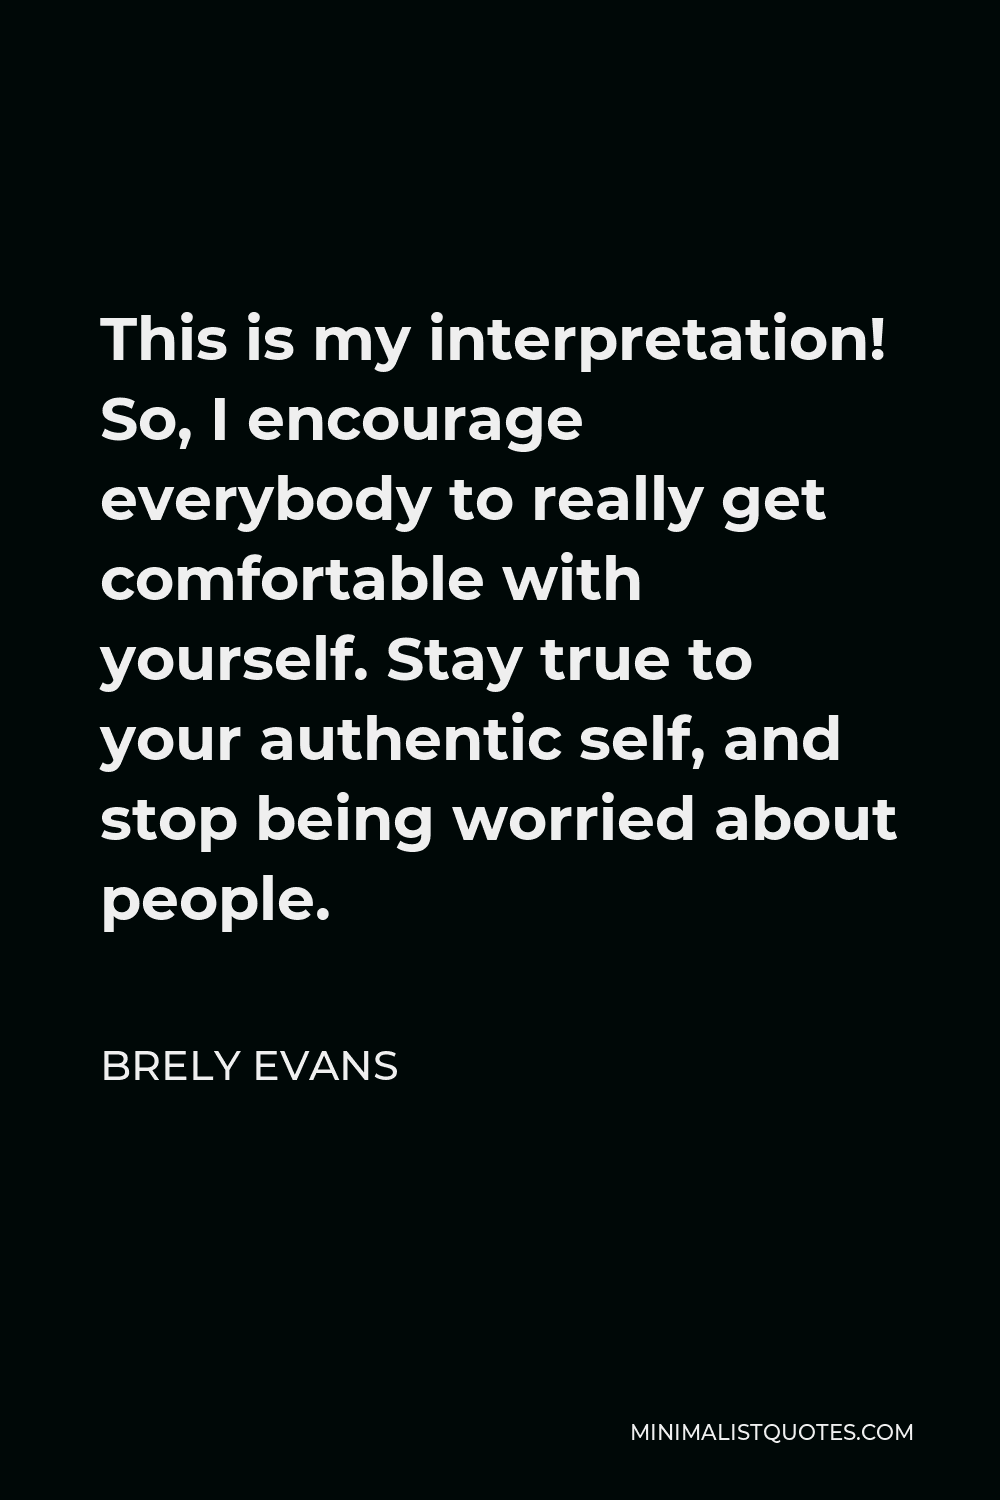 Brely Evans Quote - This is my interpretation! So, I encourage everybody to really get comfortable with yourself. Stay true to your authentic self, and stop being worried about people.